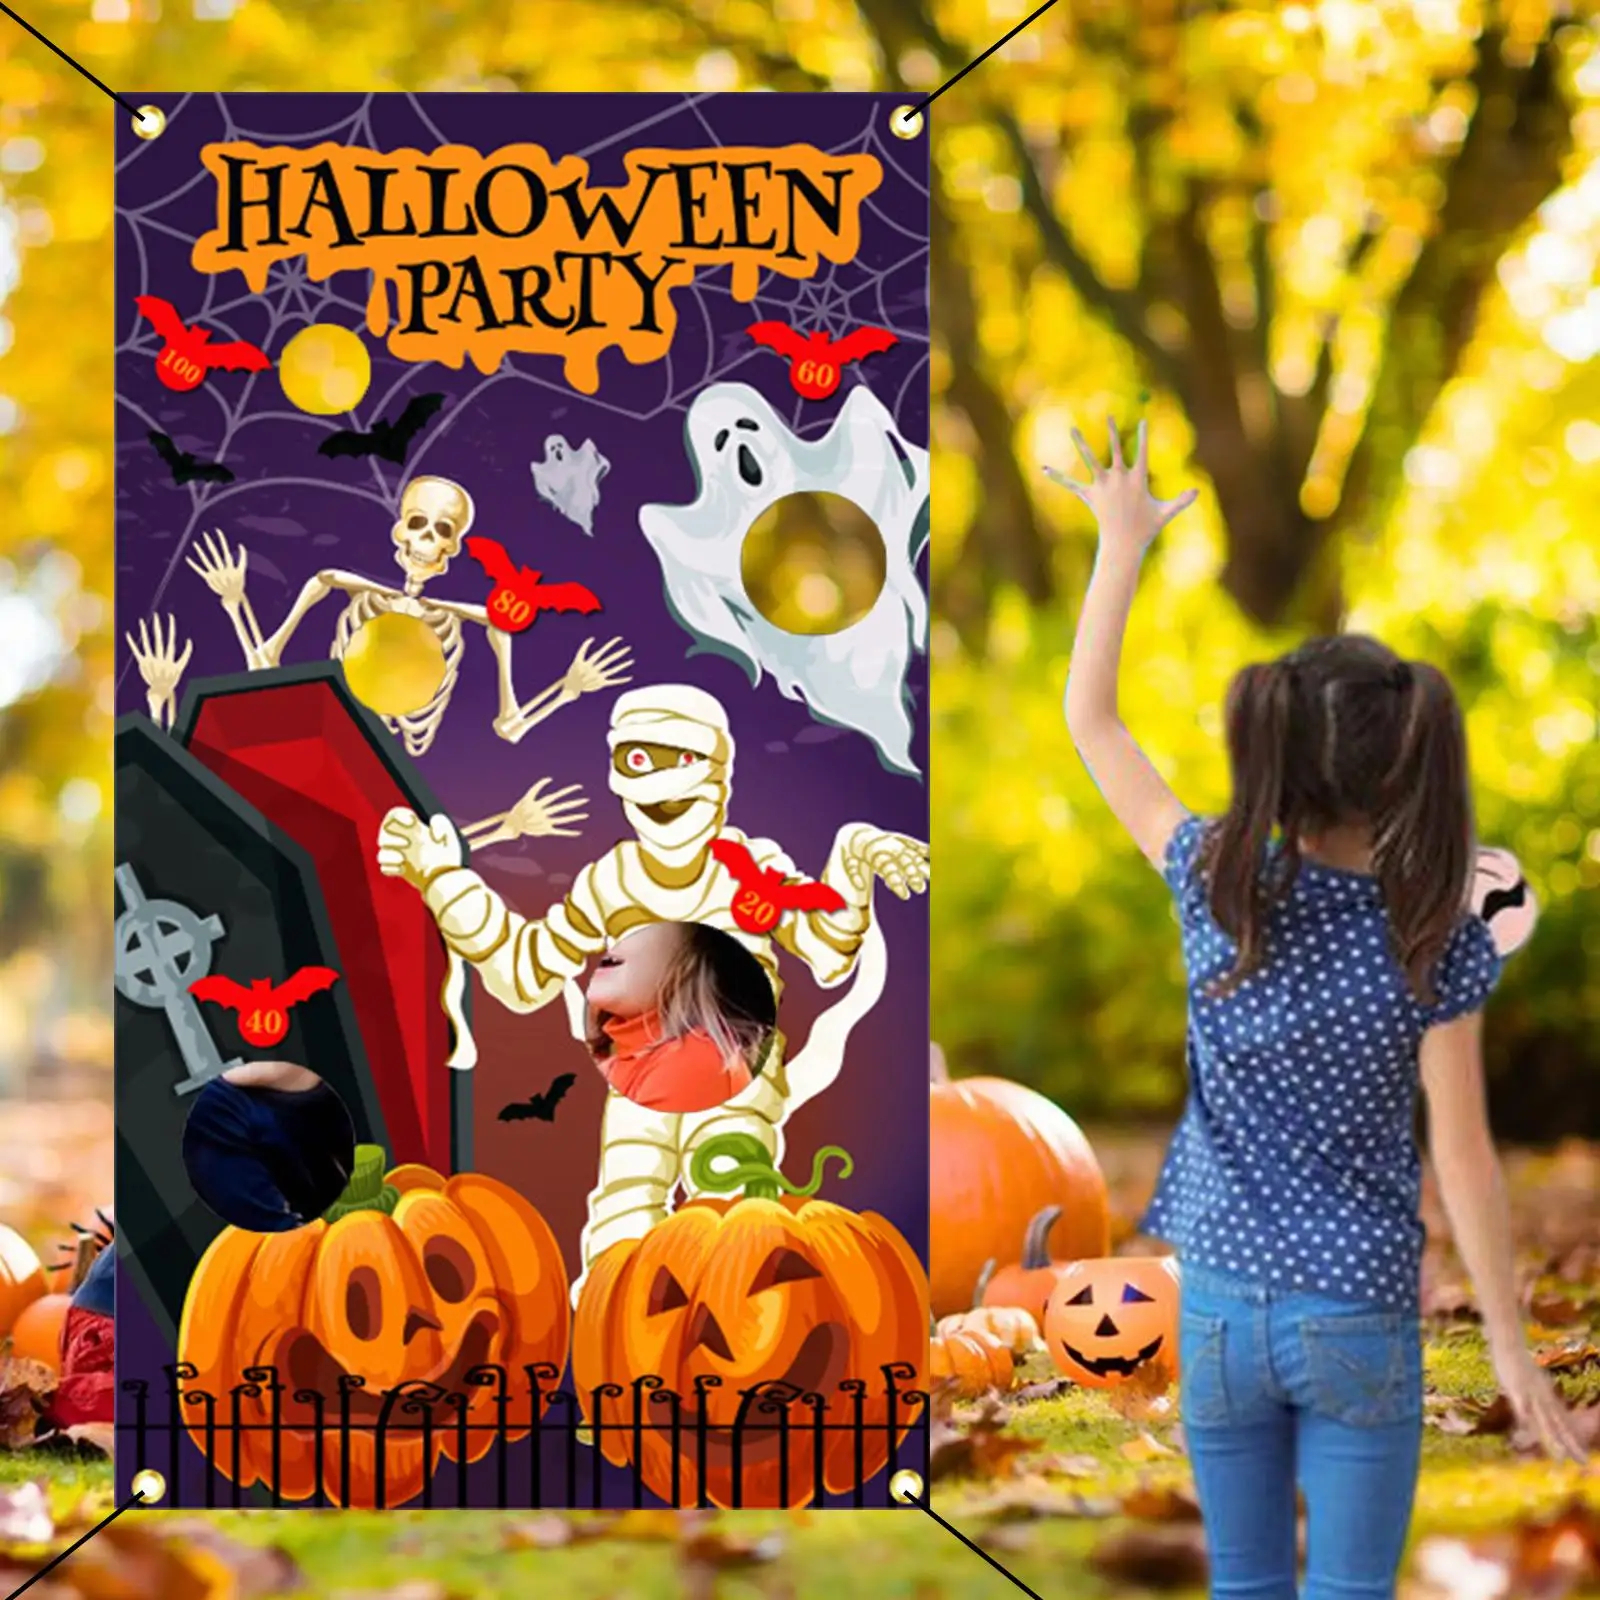 Halloween Themed Throwing Game Banner Kit for Adults Kids ,31.5x55Inches